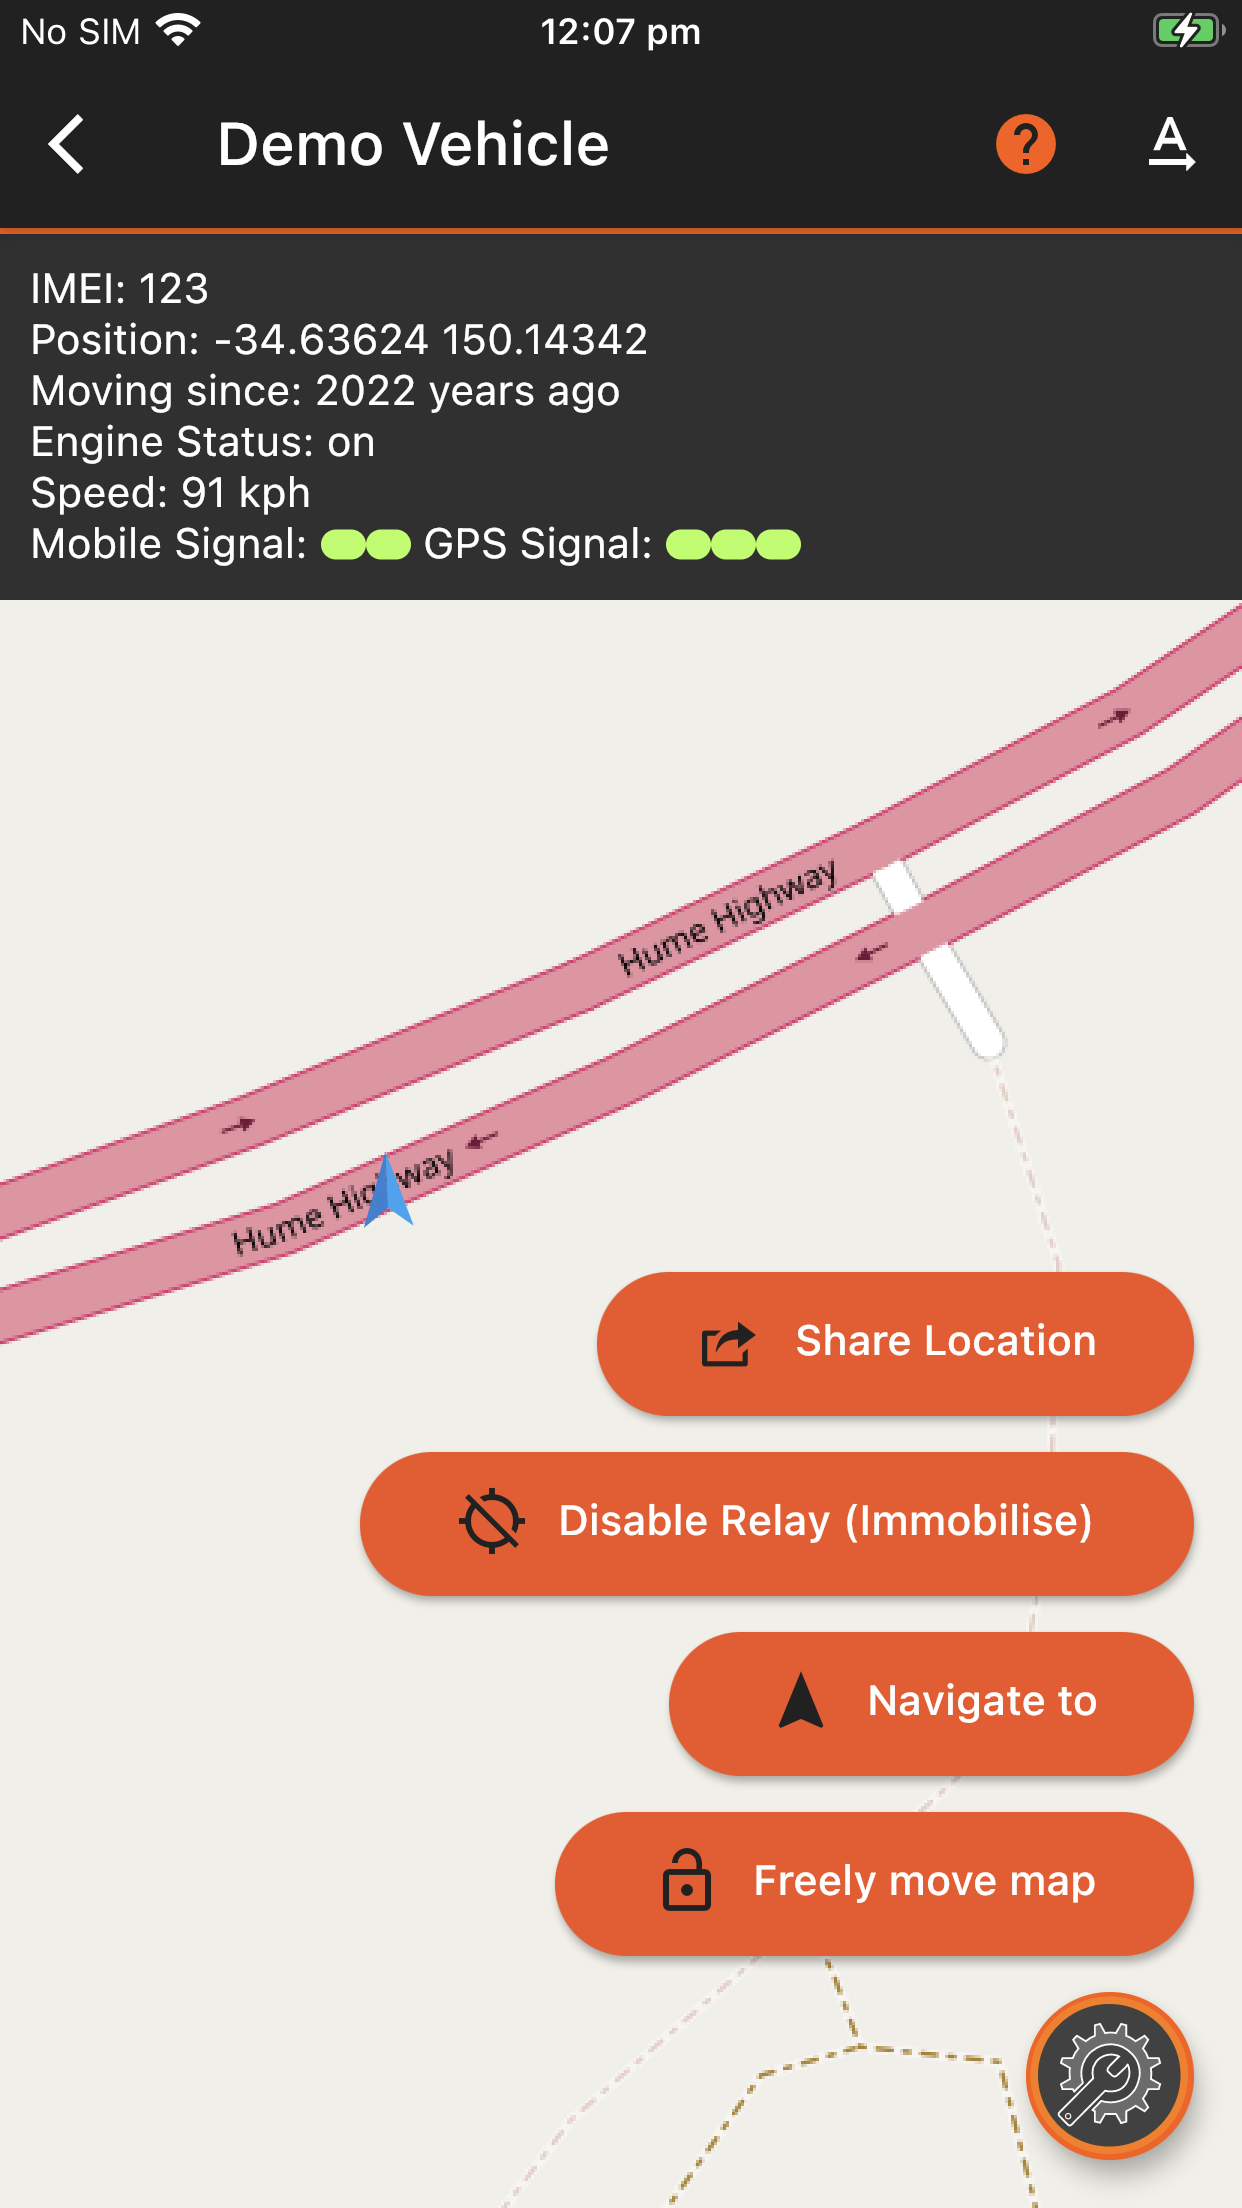 View of a tracker in the app